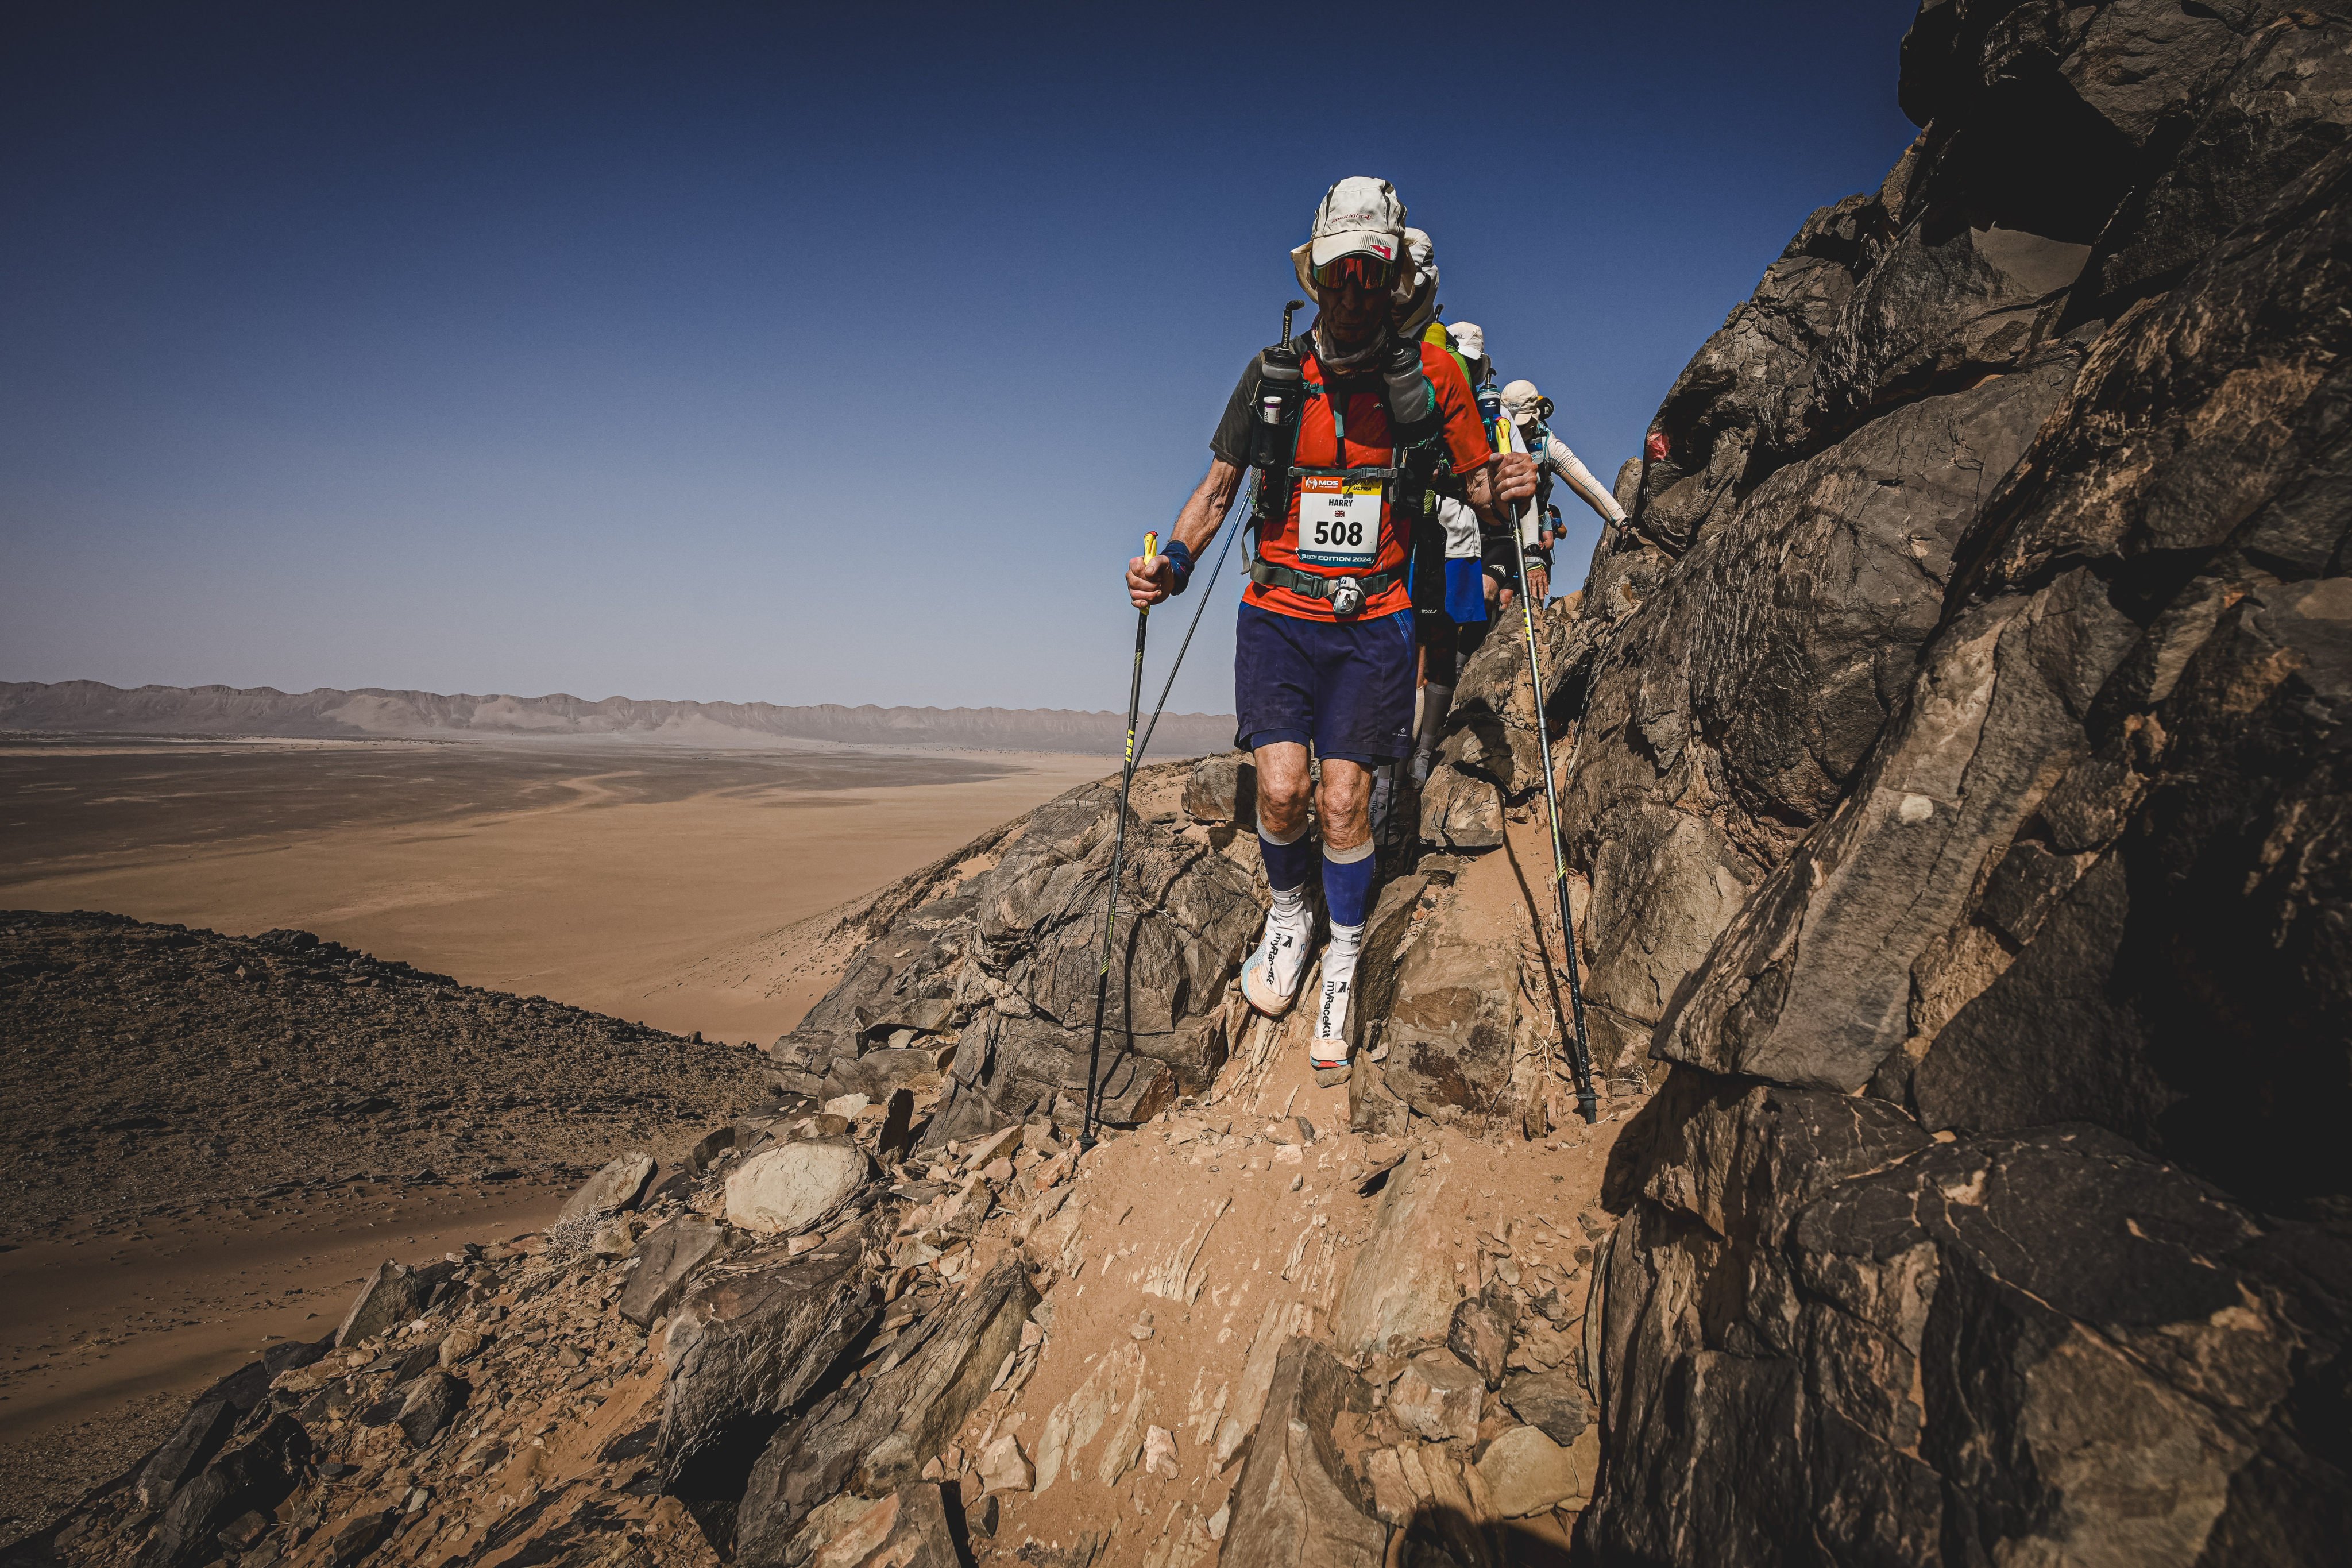 Harry Hunter, 76, takes part in the 250km Marathon des Sables ultramarathon through the Sahara Desert, the world’s hardest foot race. The Briton explains what motivates him and to what he ascribes his running prowess. Photo: Marathon des Sables 